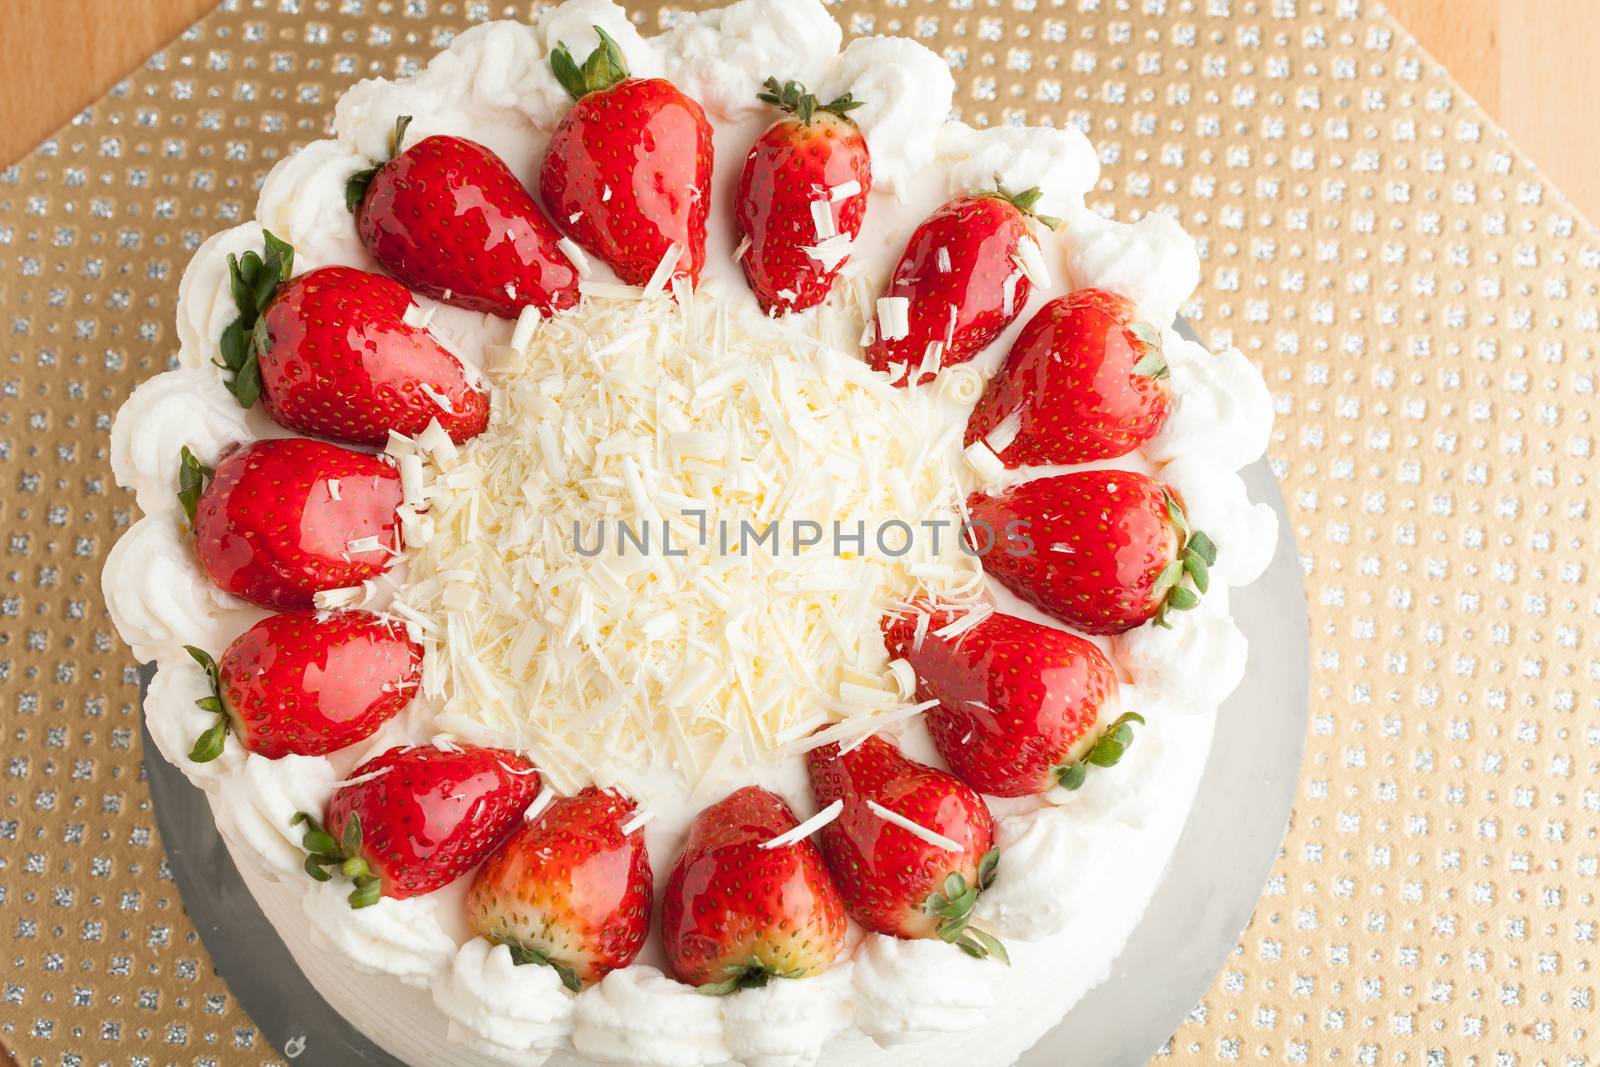 Top view of an entire strawberry shortcake with white chocolate shavings.  Shallow depth of field.